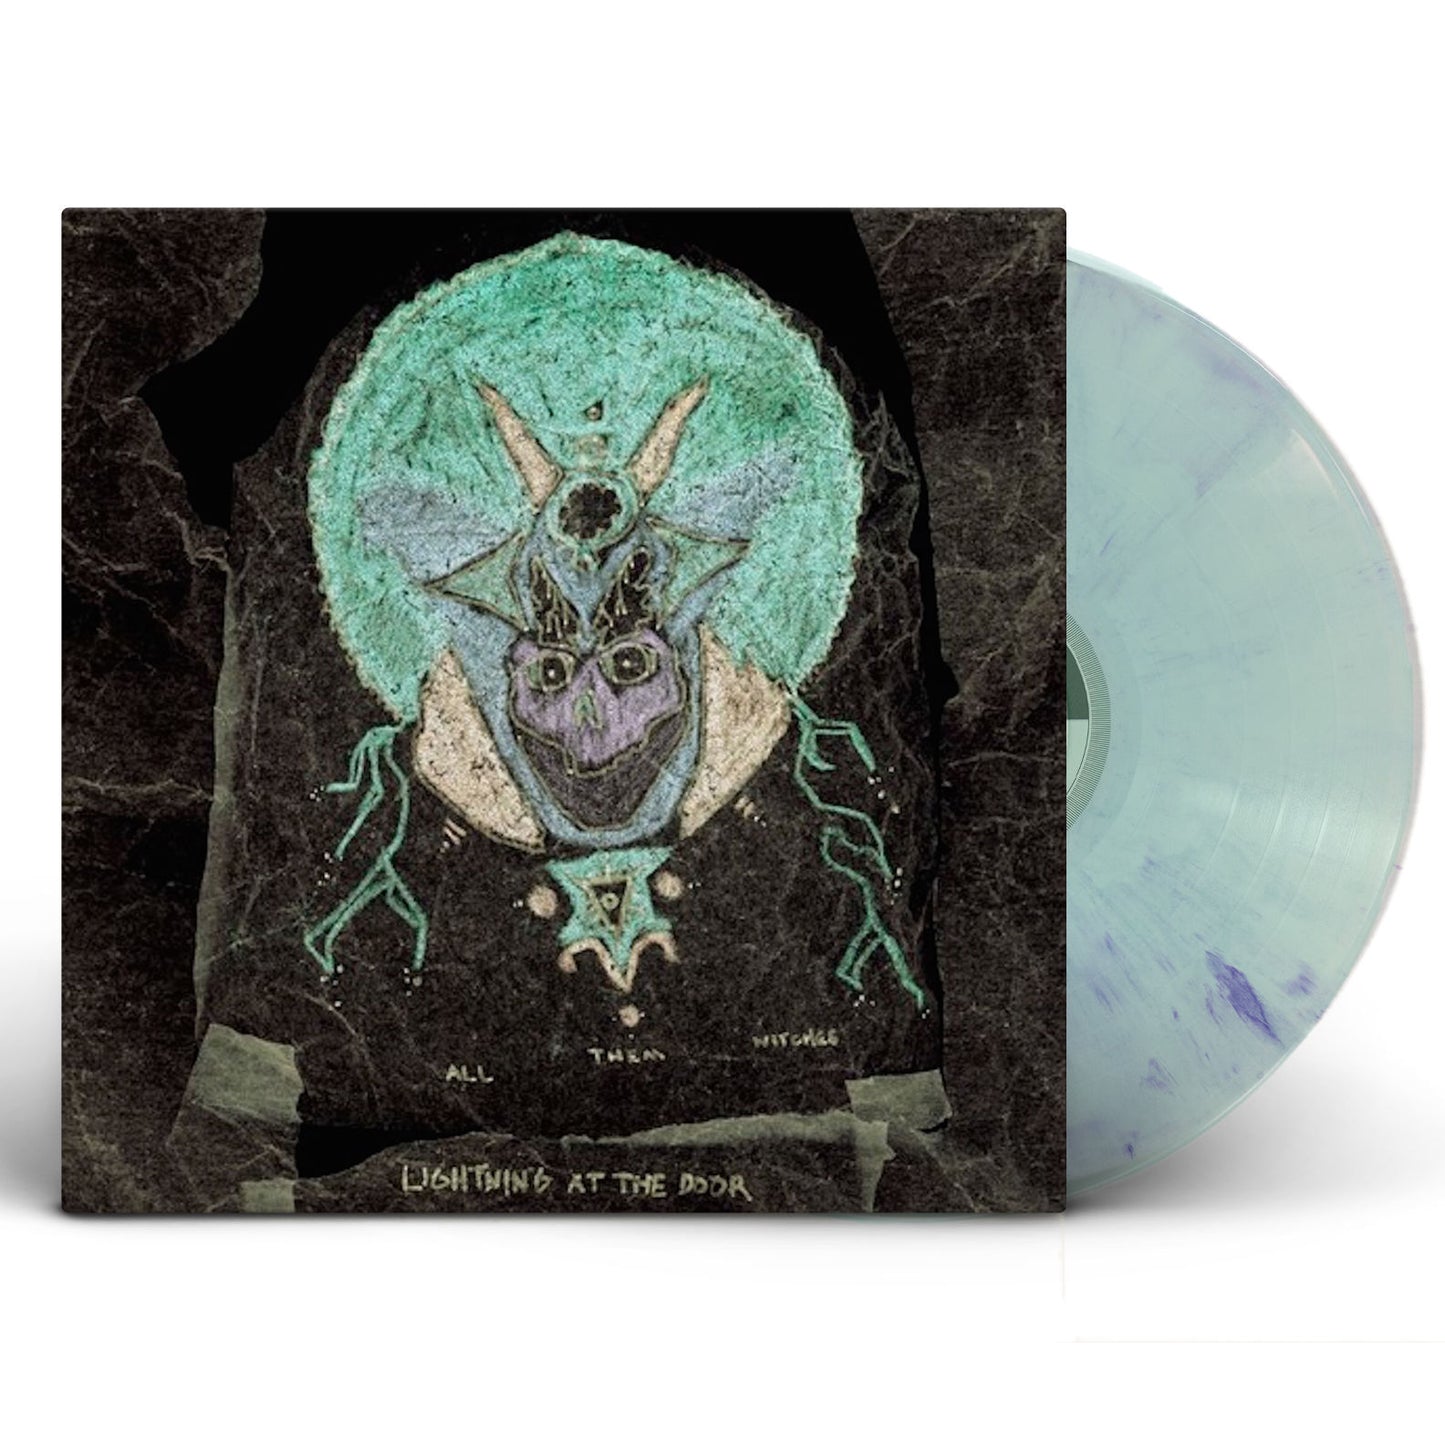 All Them Witches - Lightning At The Door LP (Green, Purple & Silver Vinyl, limited to 2500)